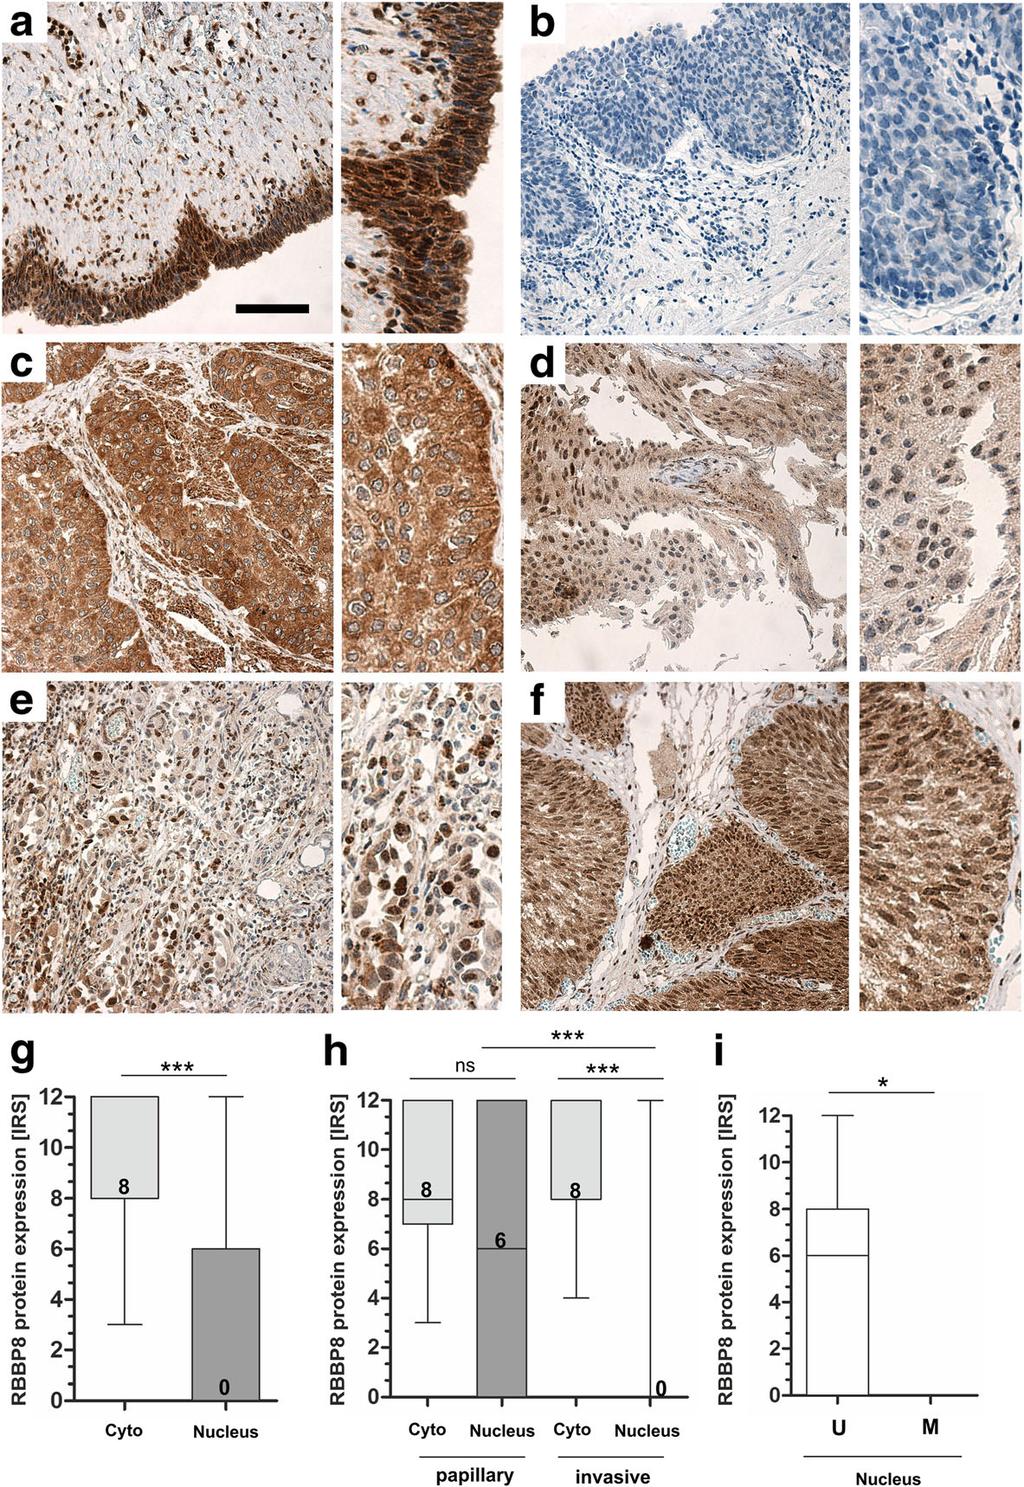 Mijnes et al. Clinical Epigenetics (2018) 10:15 Page 9 of 20 Fig. 5 RBBP8 protein loss in nuclei of bladder tumors. Immunohistochemical RBBP8 protein staining of representative tissues are shown.